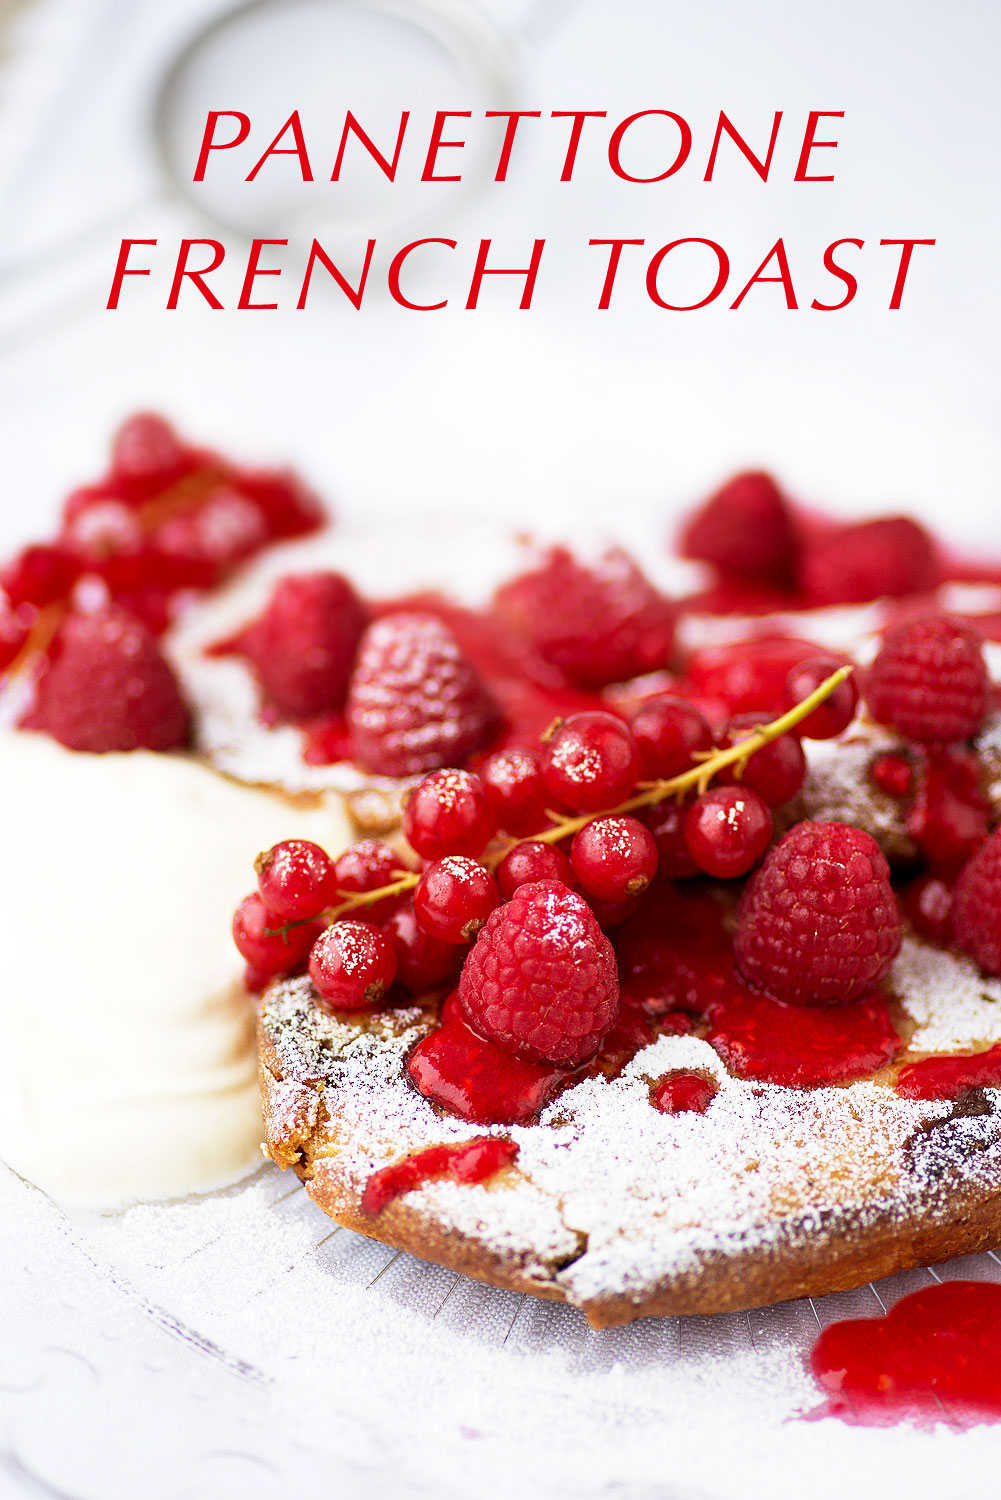 Panettone French Toast with Raspberry Compote, Red Currants and Crème fraîche